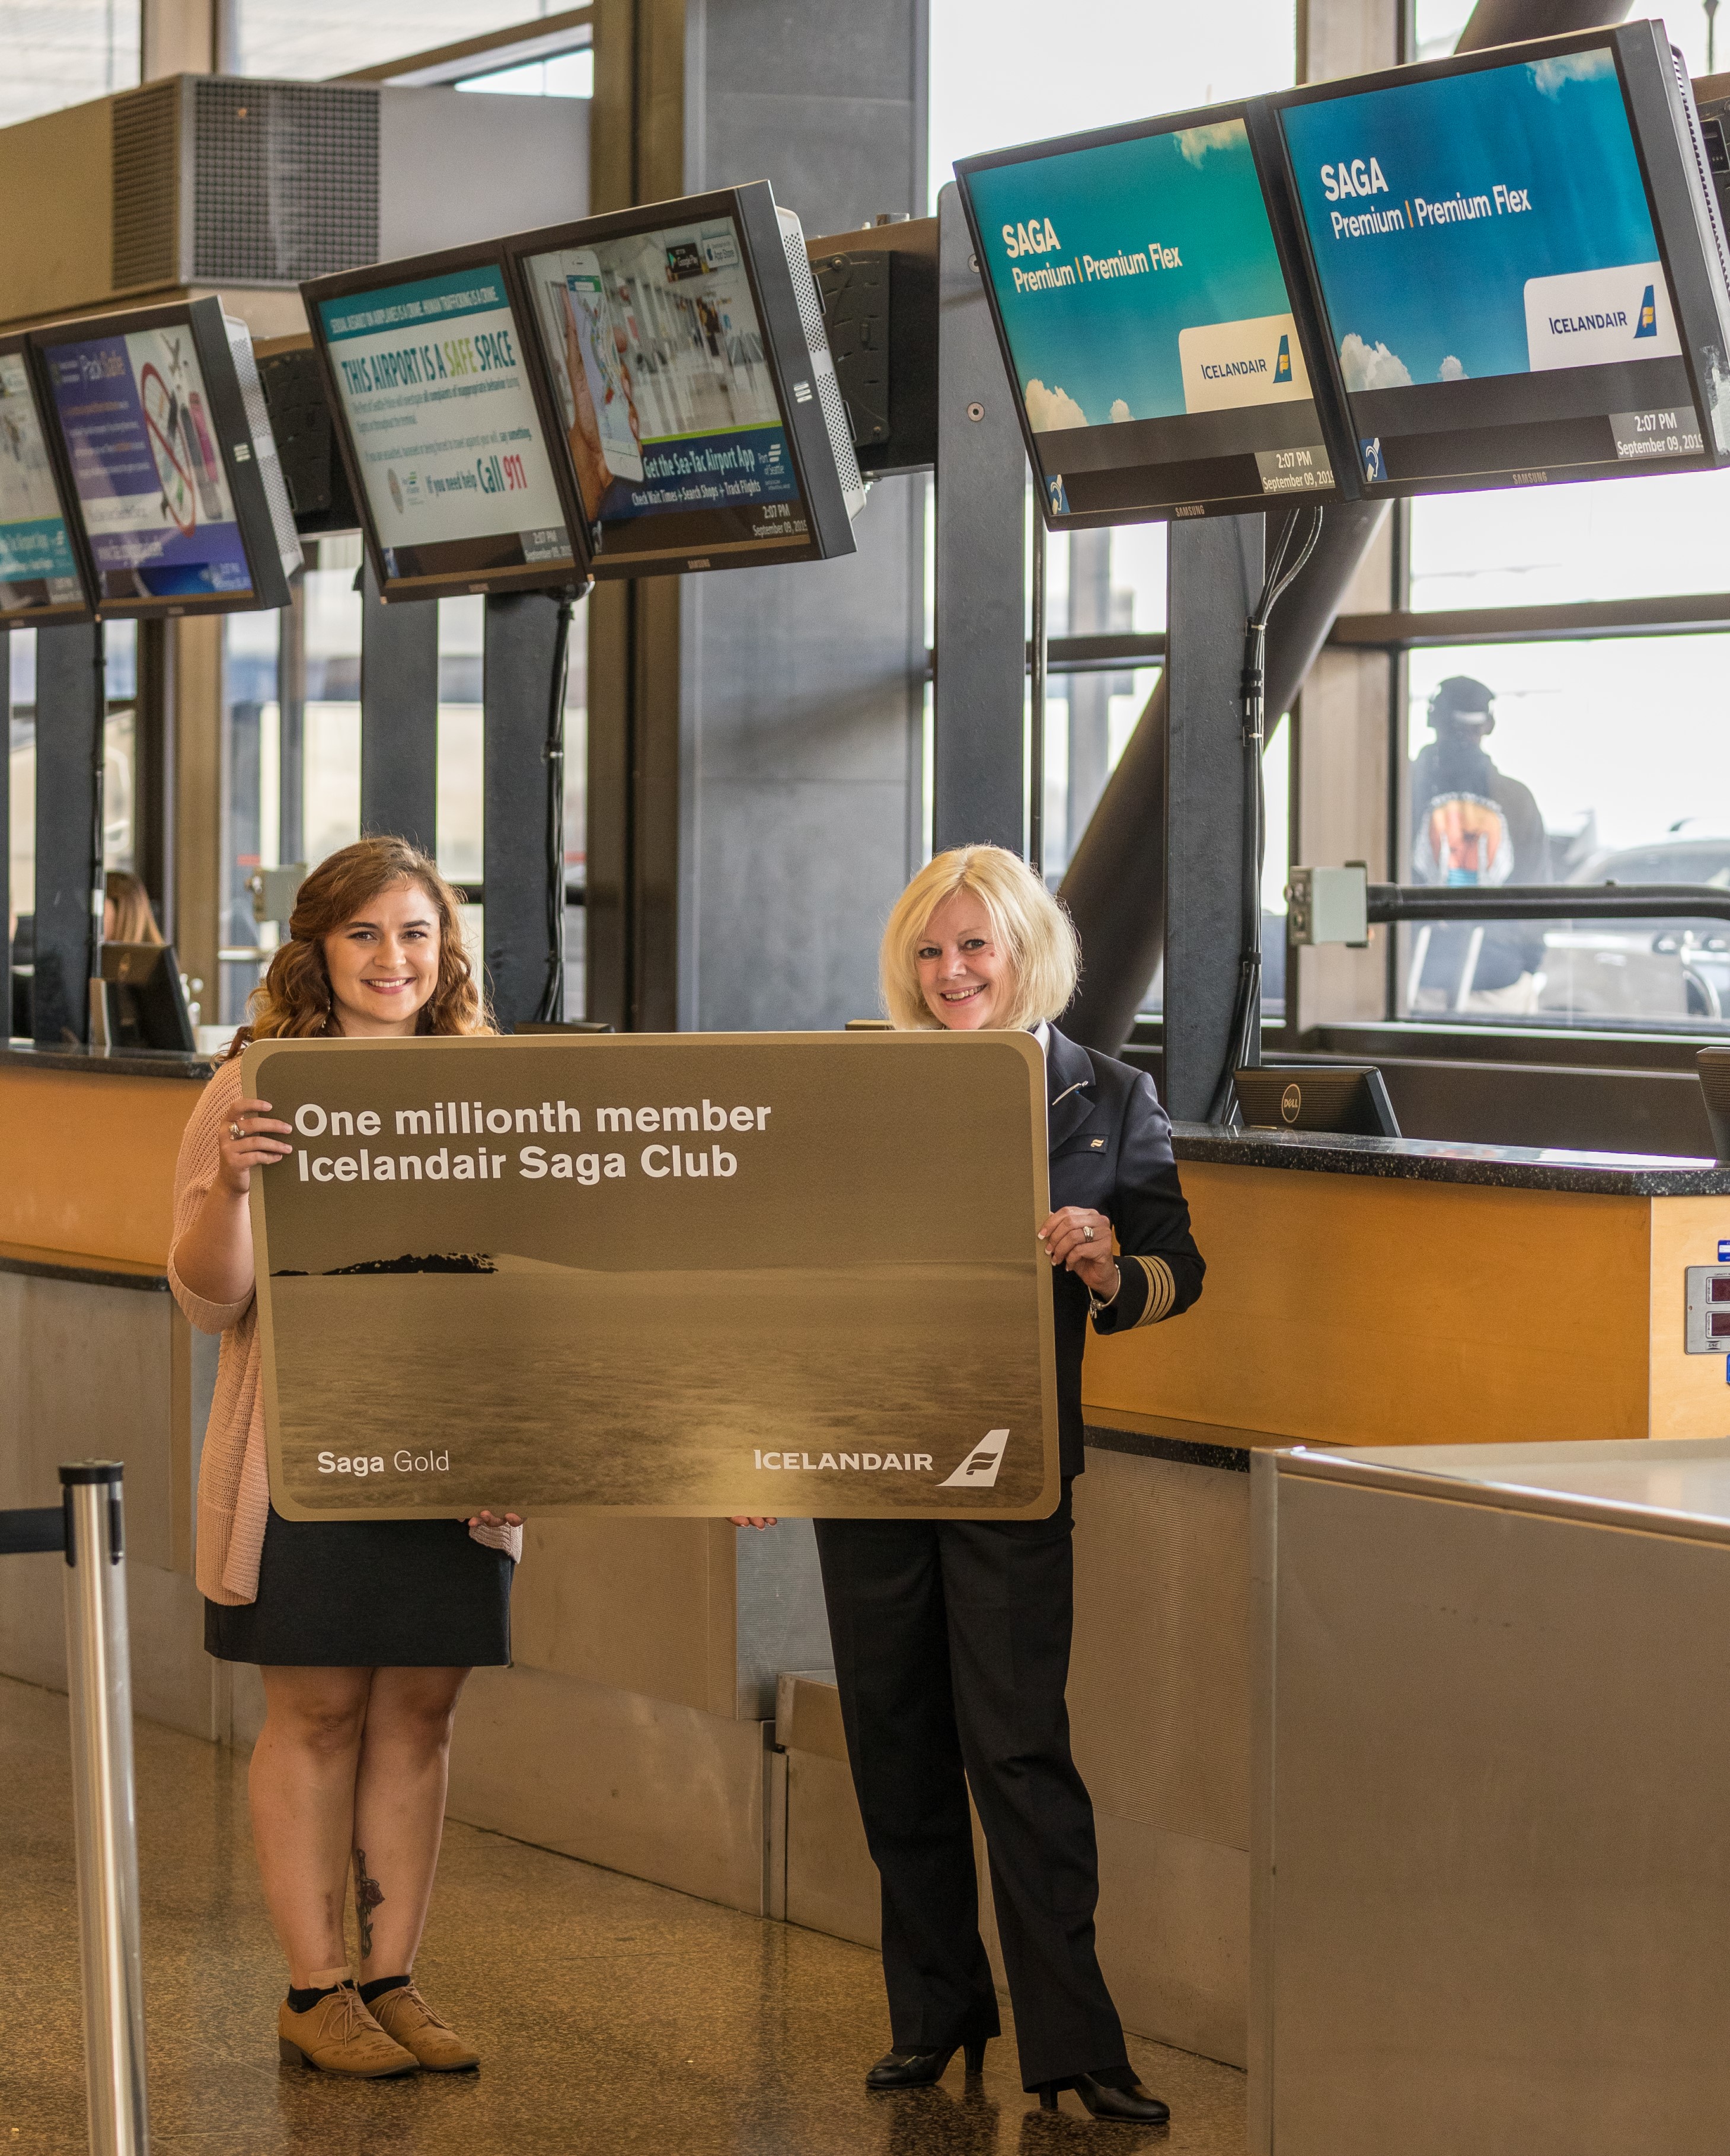 Hayley Nichols and Jessica Ginger pictured in the airport holding a large gold Icelandair Saga Club card with text that reads 'One millionth member'